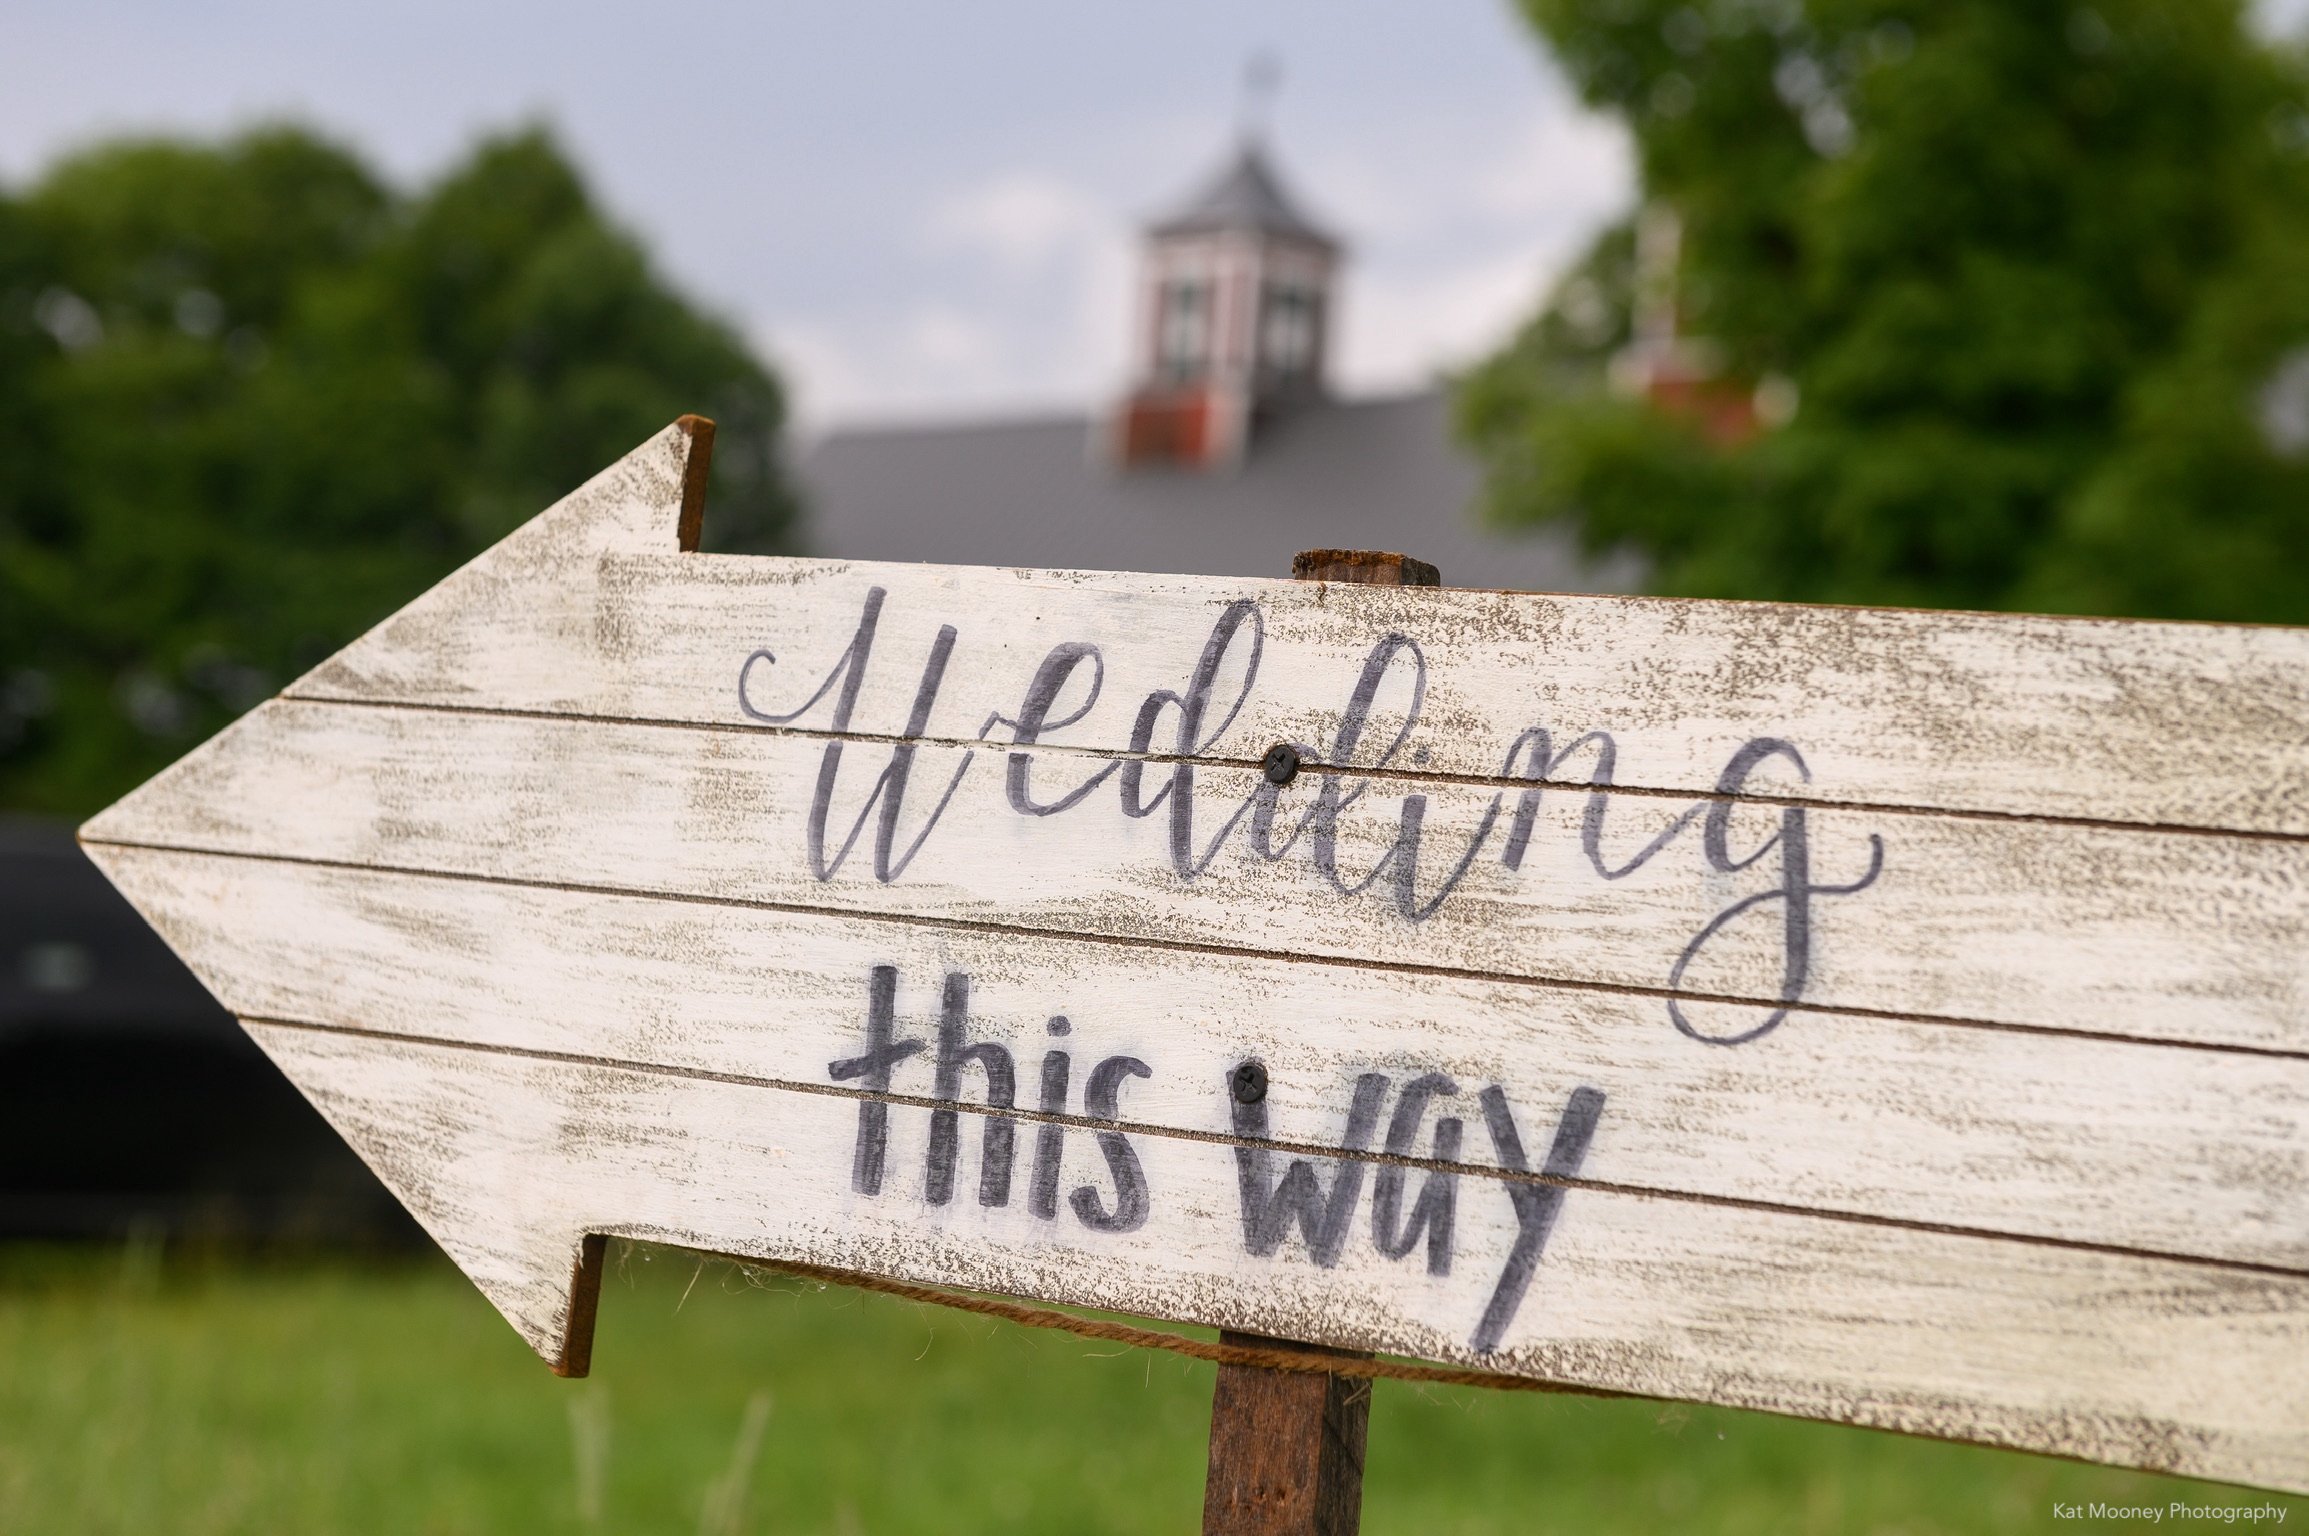 A wedding sign on reclaimed wood with the barn in the distance